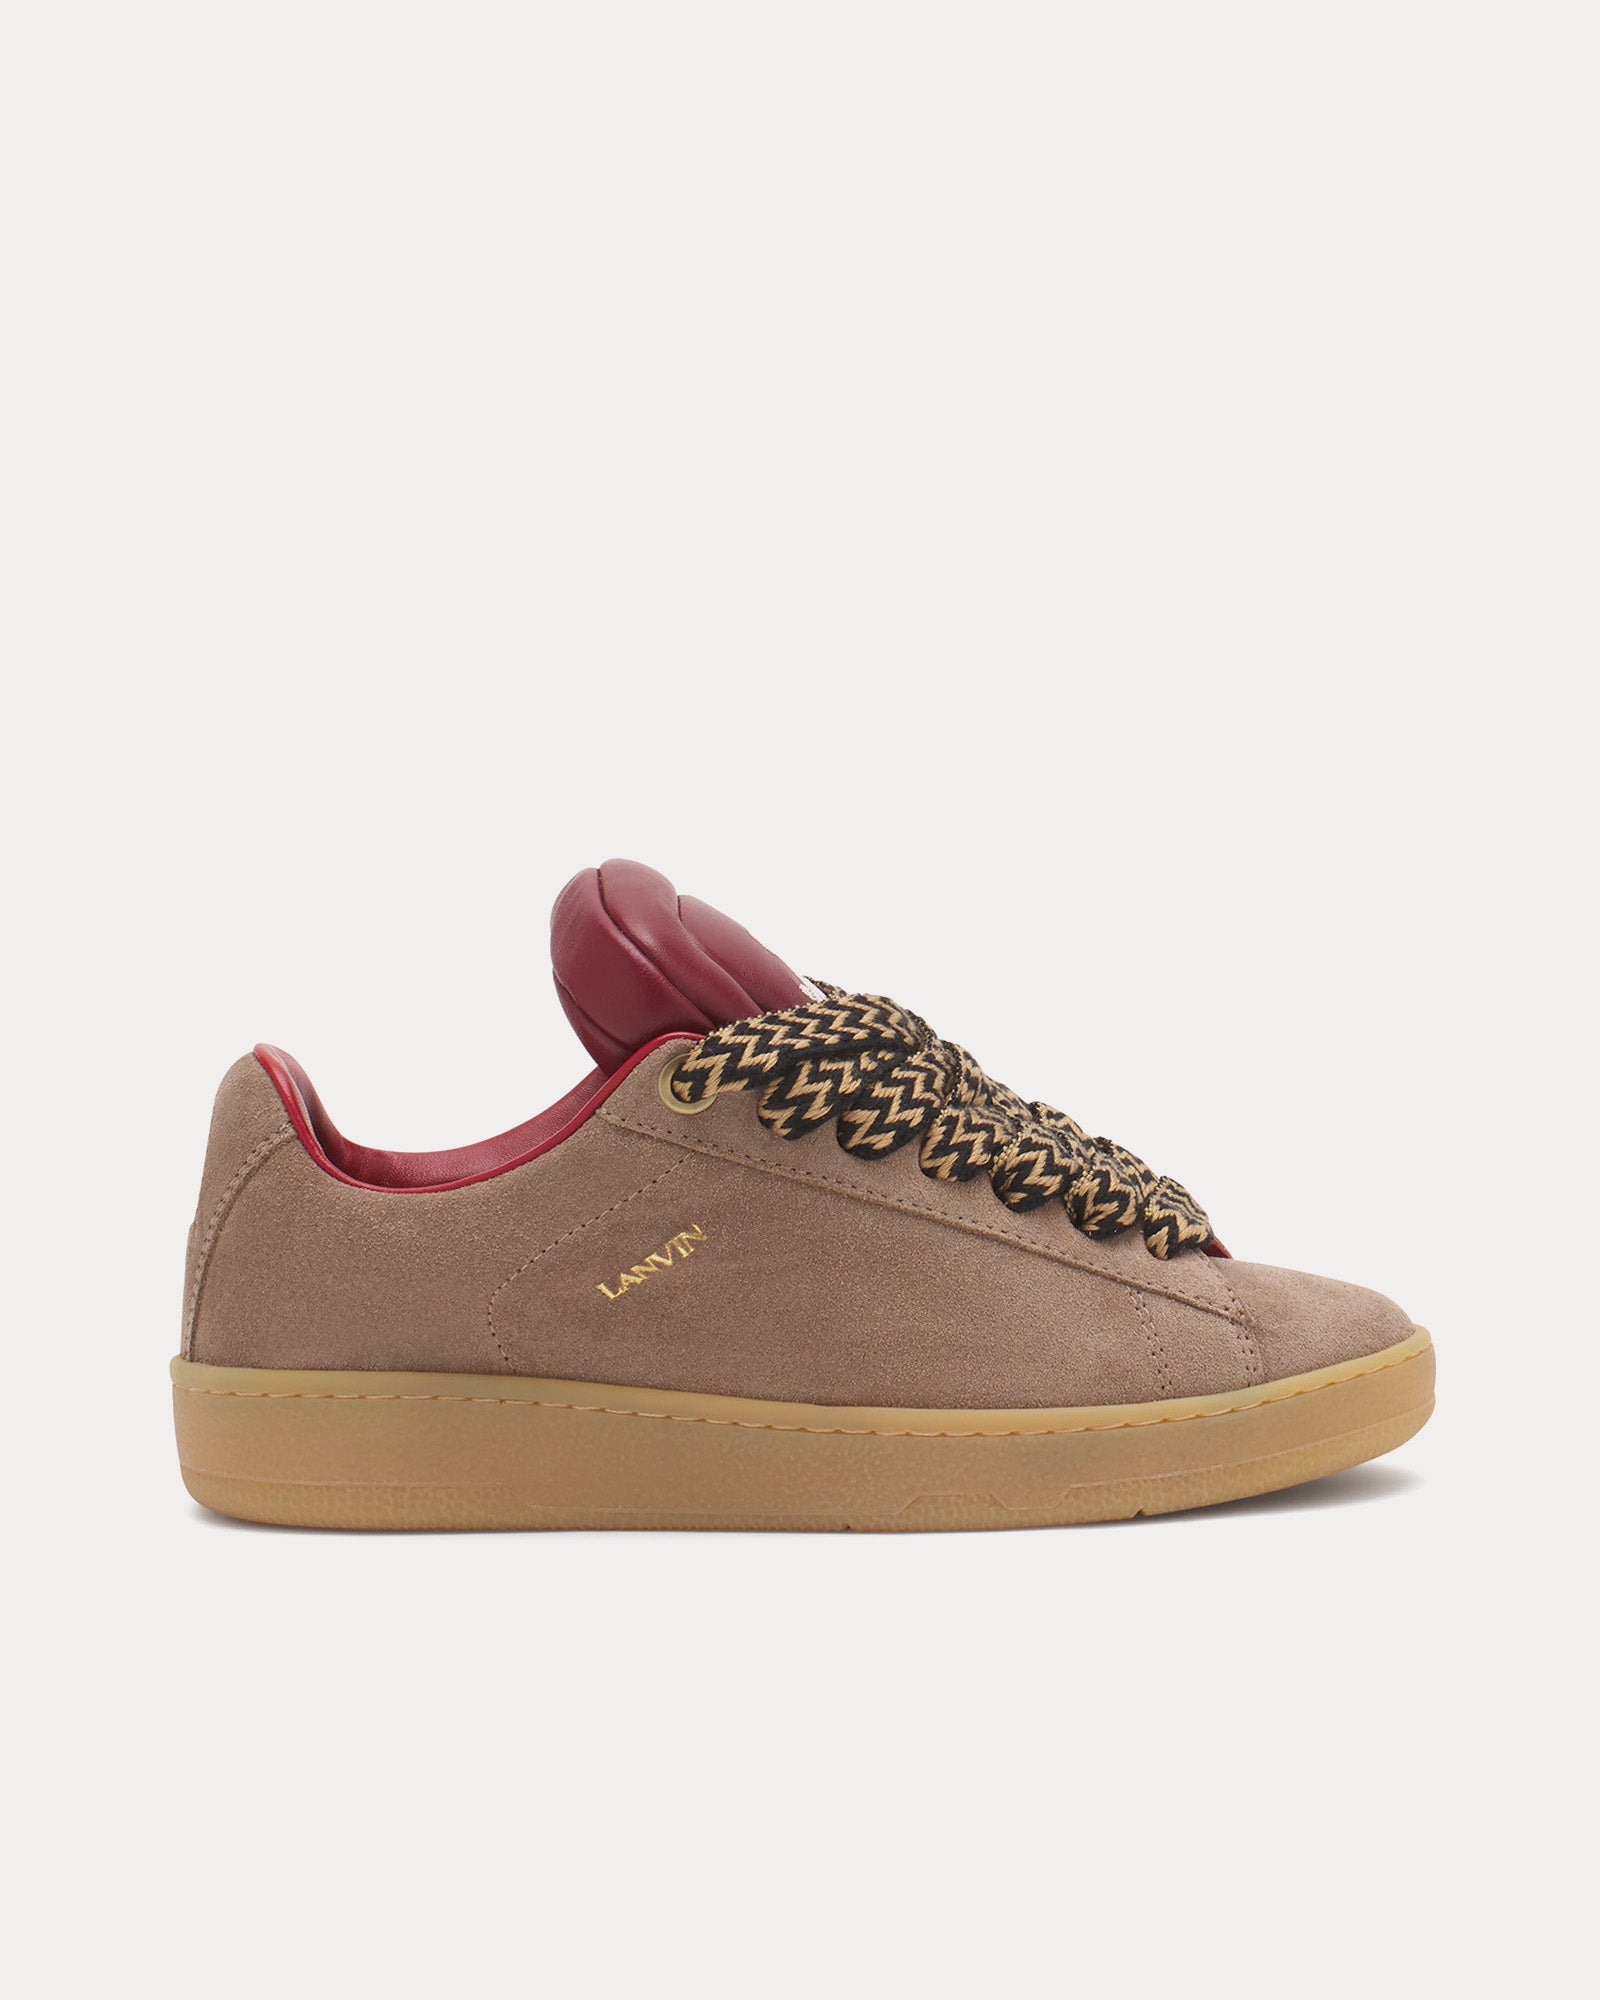 Lanvin x Future - Hyper Curb Lite Leather & Suede Taupe / Red Low Top Sneakers